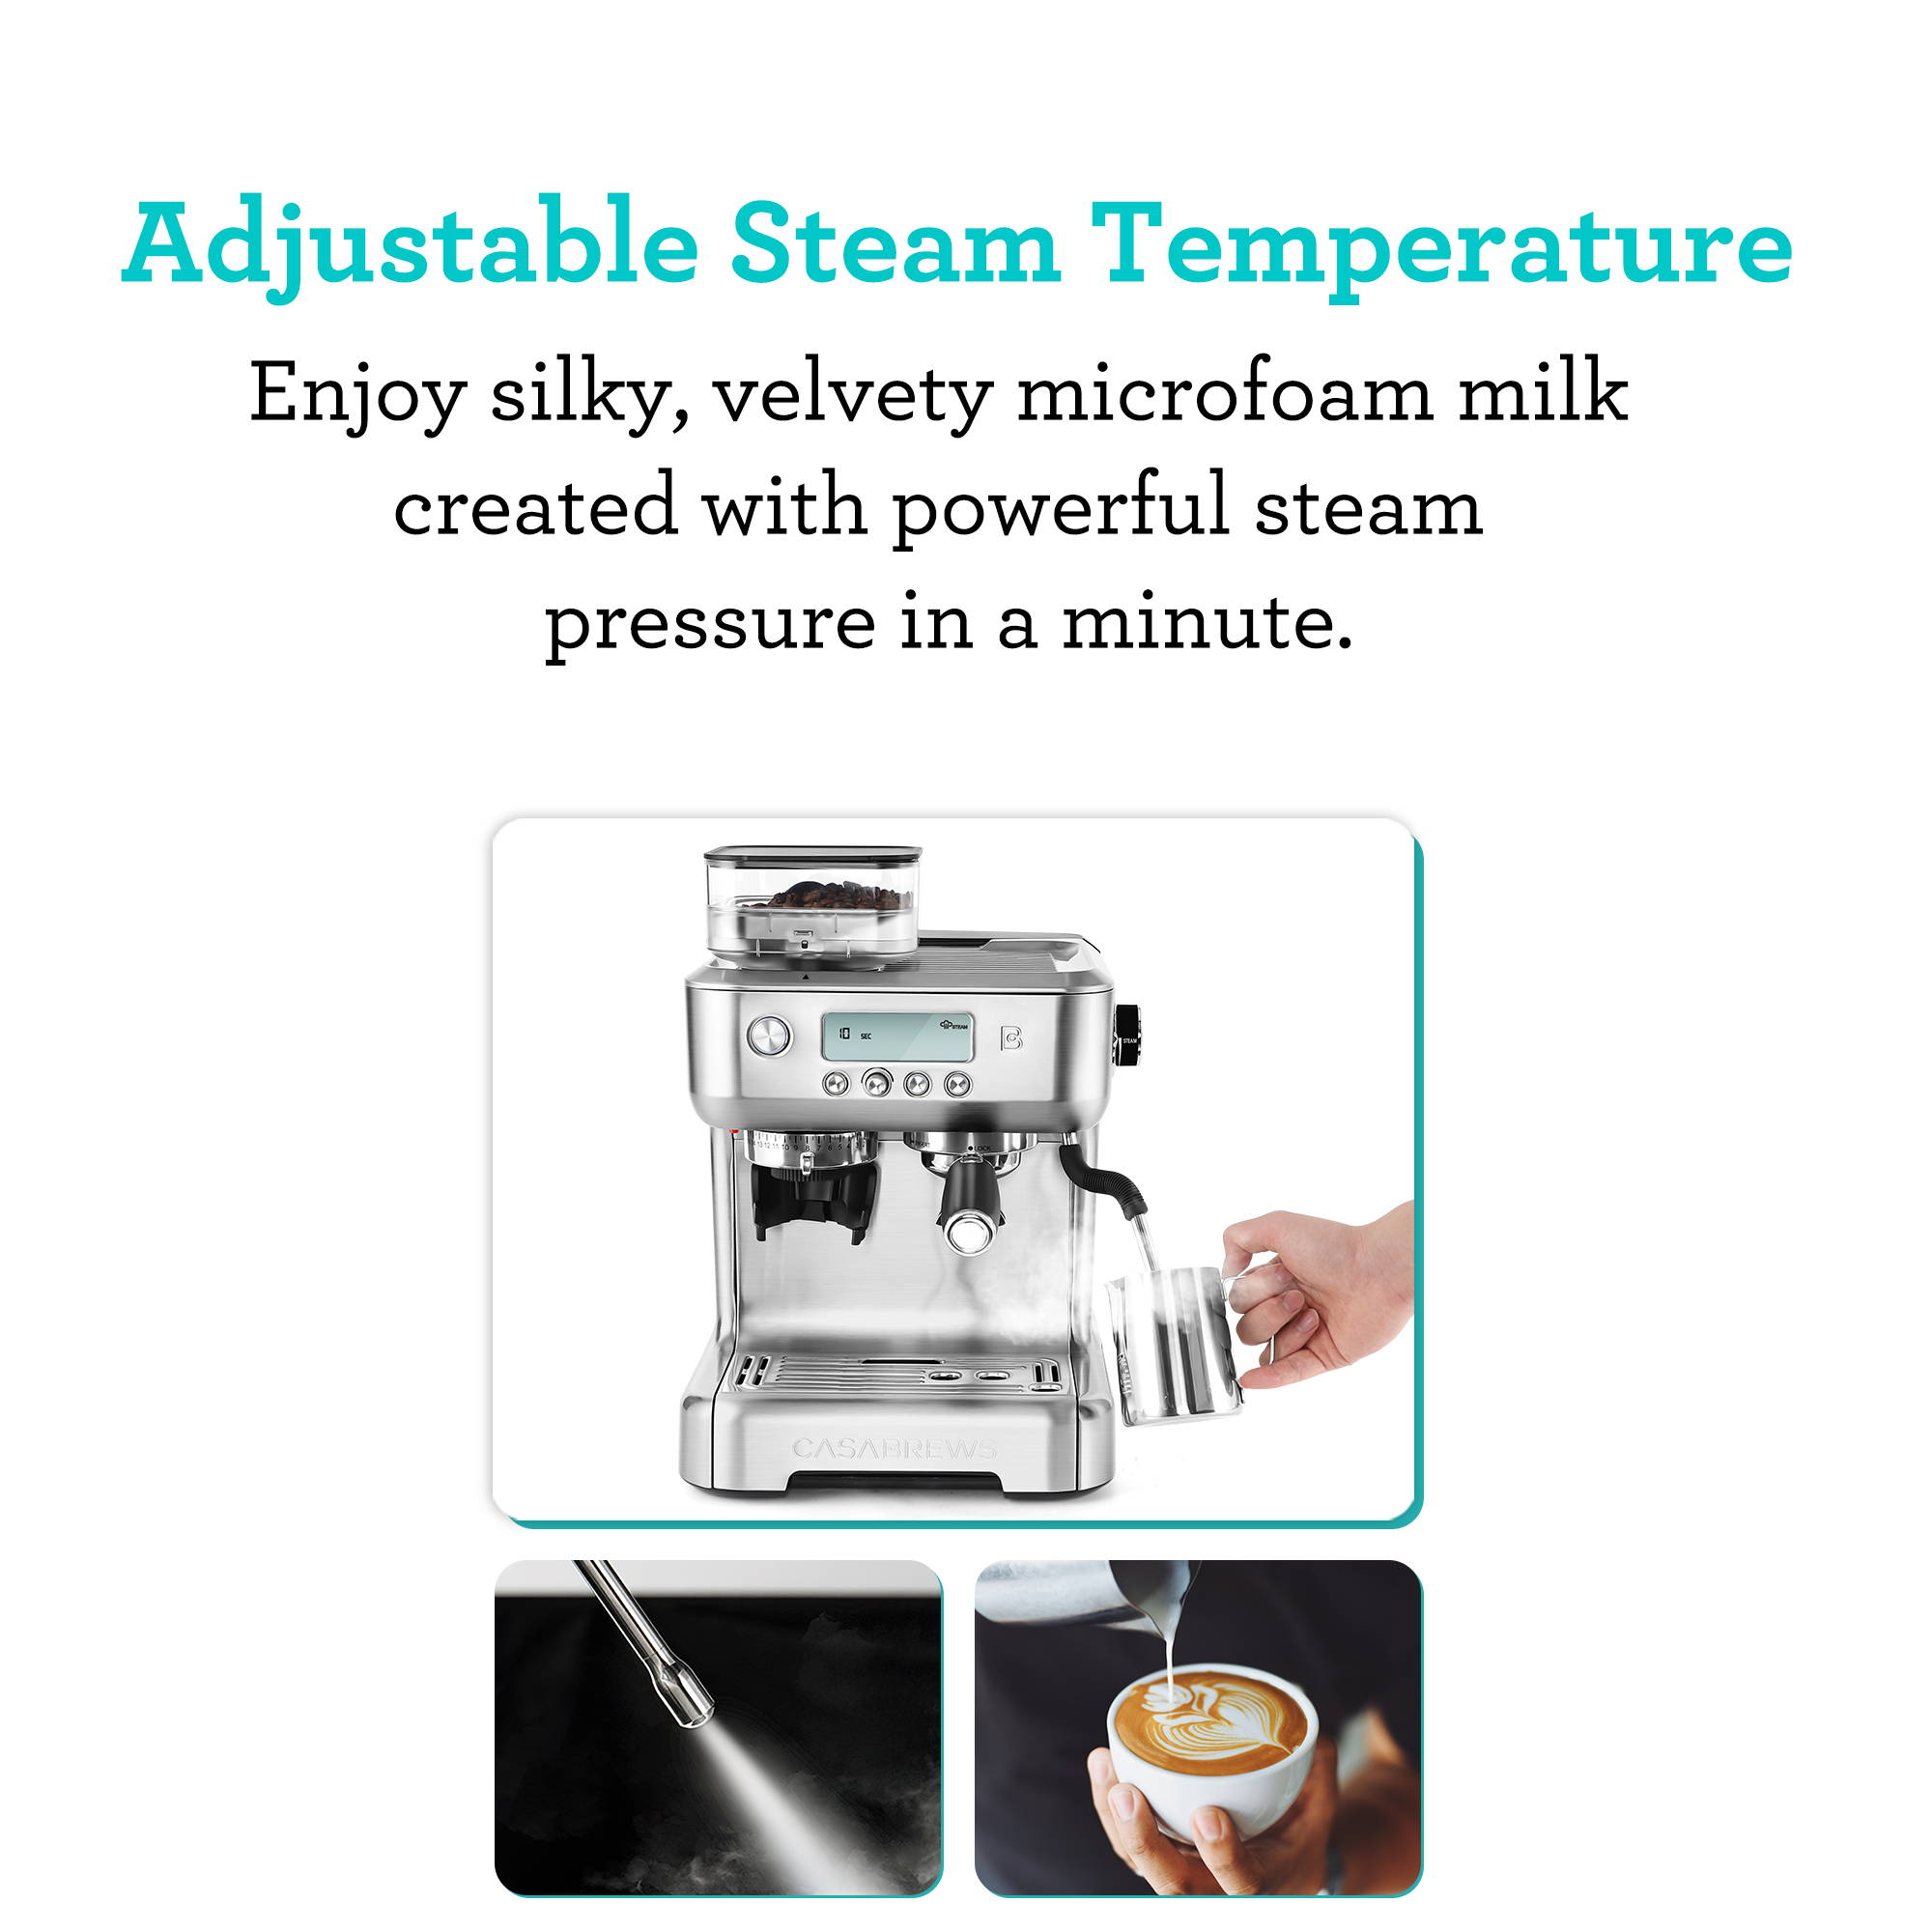 Silky and texture micro-foam the steam wand performance allows you to hand texture micro-foam milk that enhances flavor and enables creation of latte art.